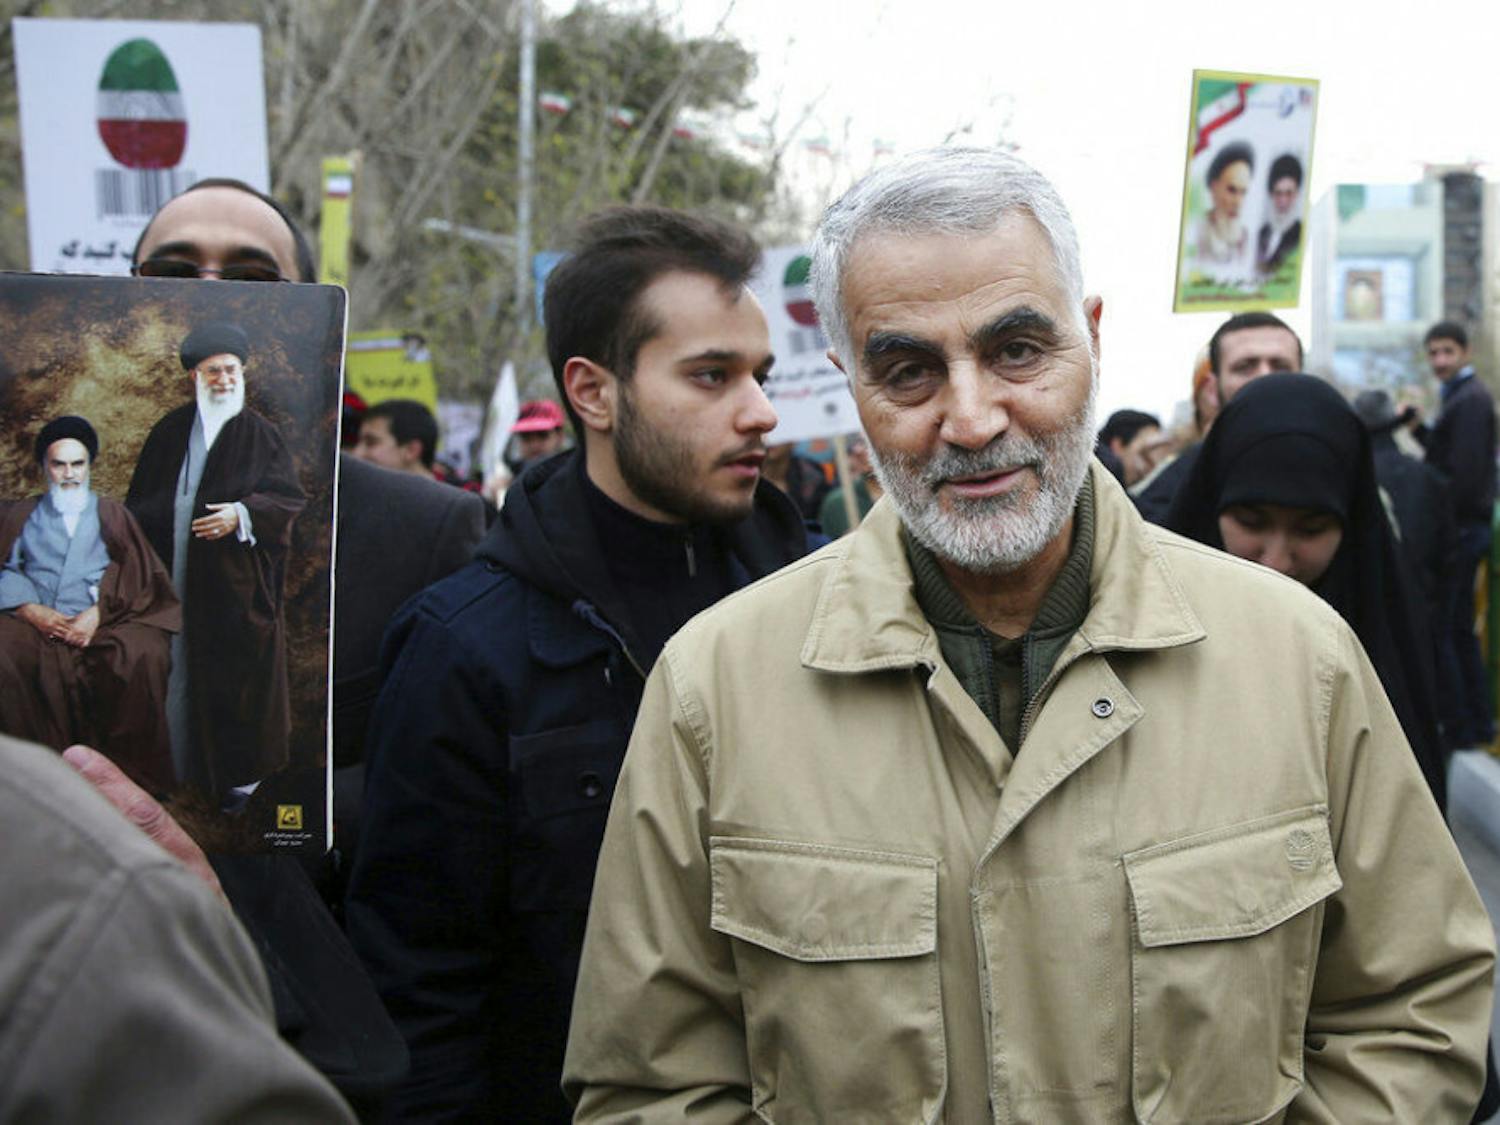 FILE - In this Thursday, Feb. 11, 2016, file photo, Qassem Soleimani, commander of Iran's Quds Force, attends an annual rally commemorating the anniversary of the 1979 Islamic revolution, in Tehran, Iran. Iraqi TV and three Iraqi officials said Friday, Jan. 3, 2020, that Gen. Qassem Soleimani, the head of Iran’s elite Quds Force, has been killed in an airstrike at Baghdad’s international airport. (AP Photo/Ebrahim Noroozi, File)